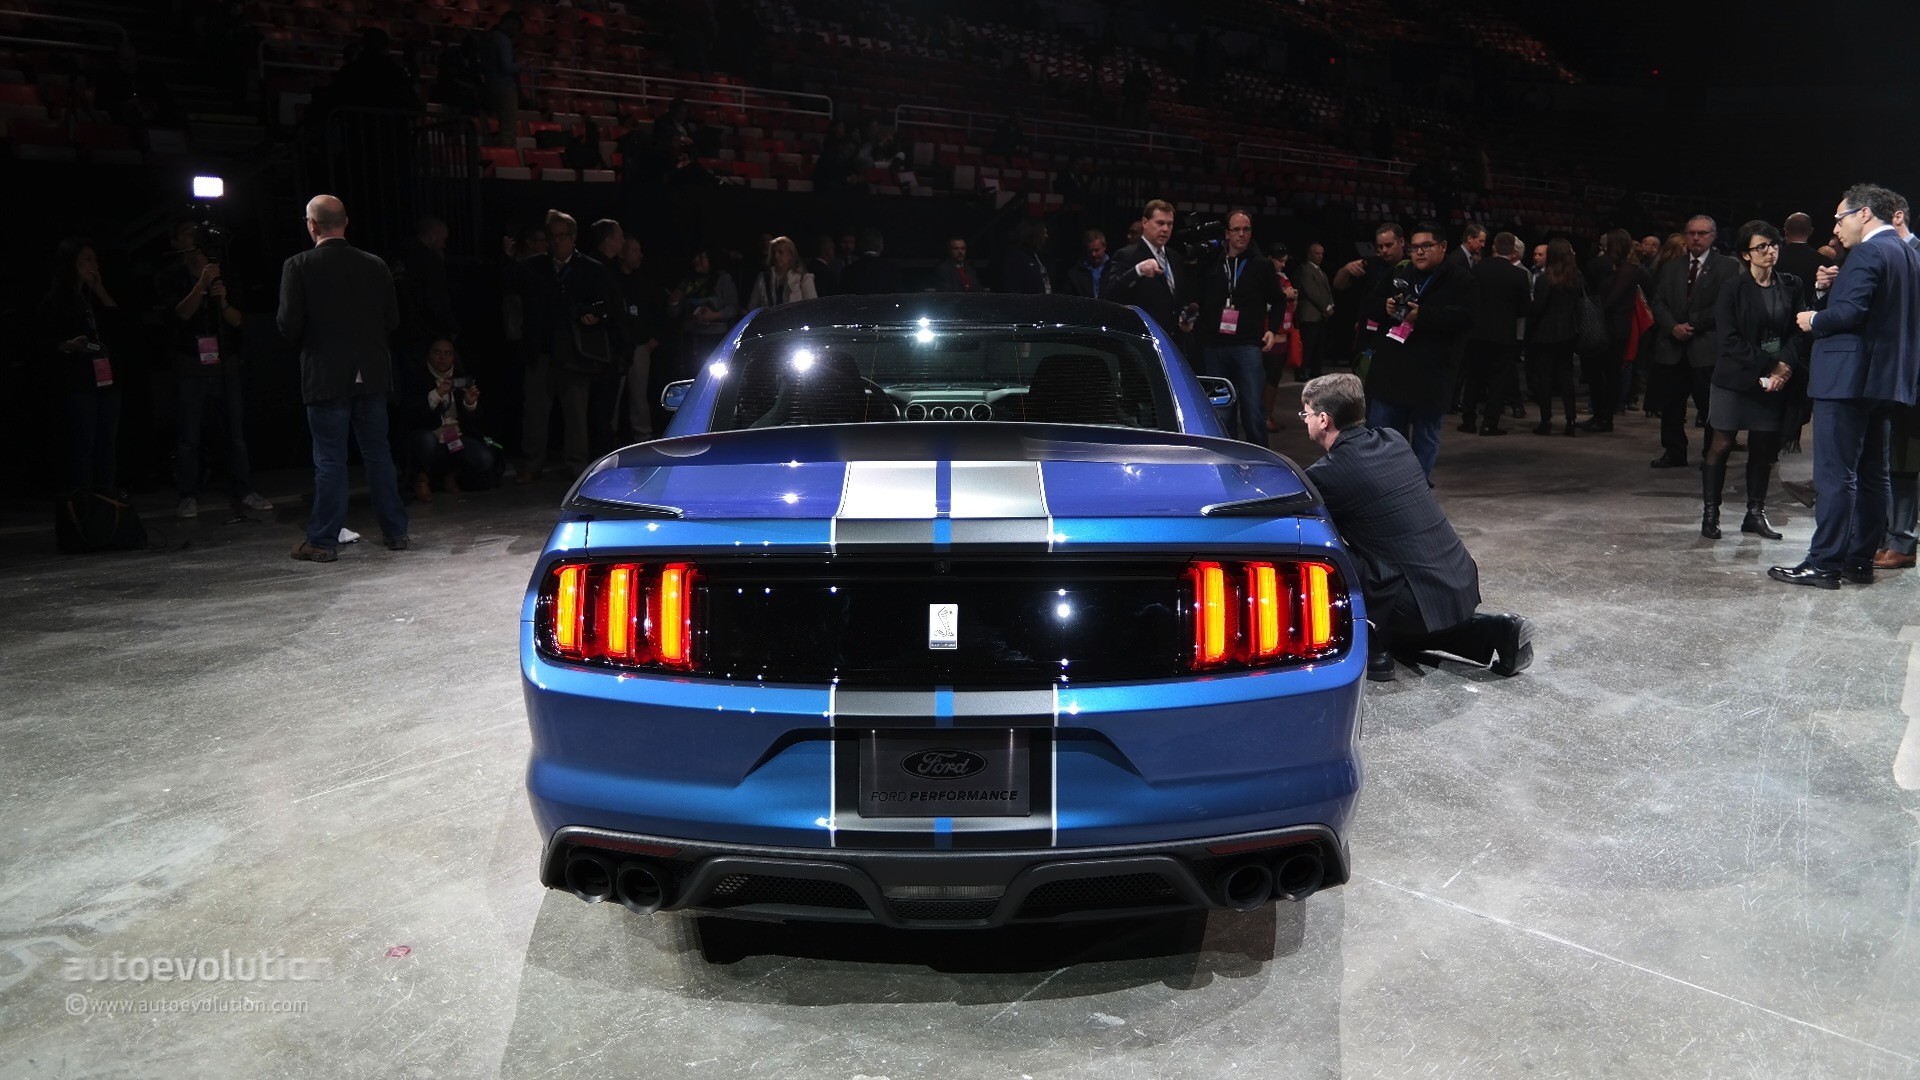 New Shelby Gt350r Mustang Unveiled In Detroit With Burnout And Over 500